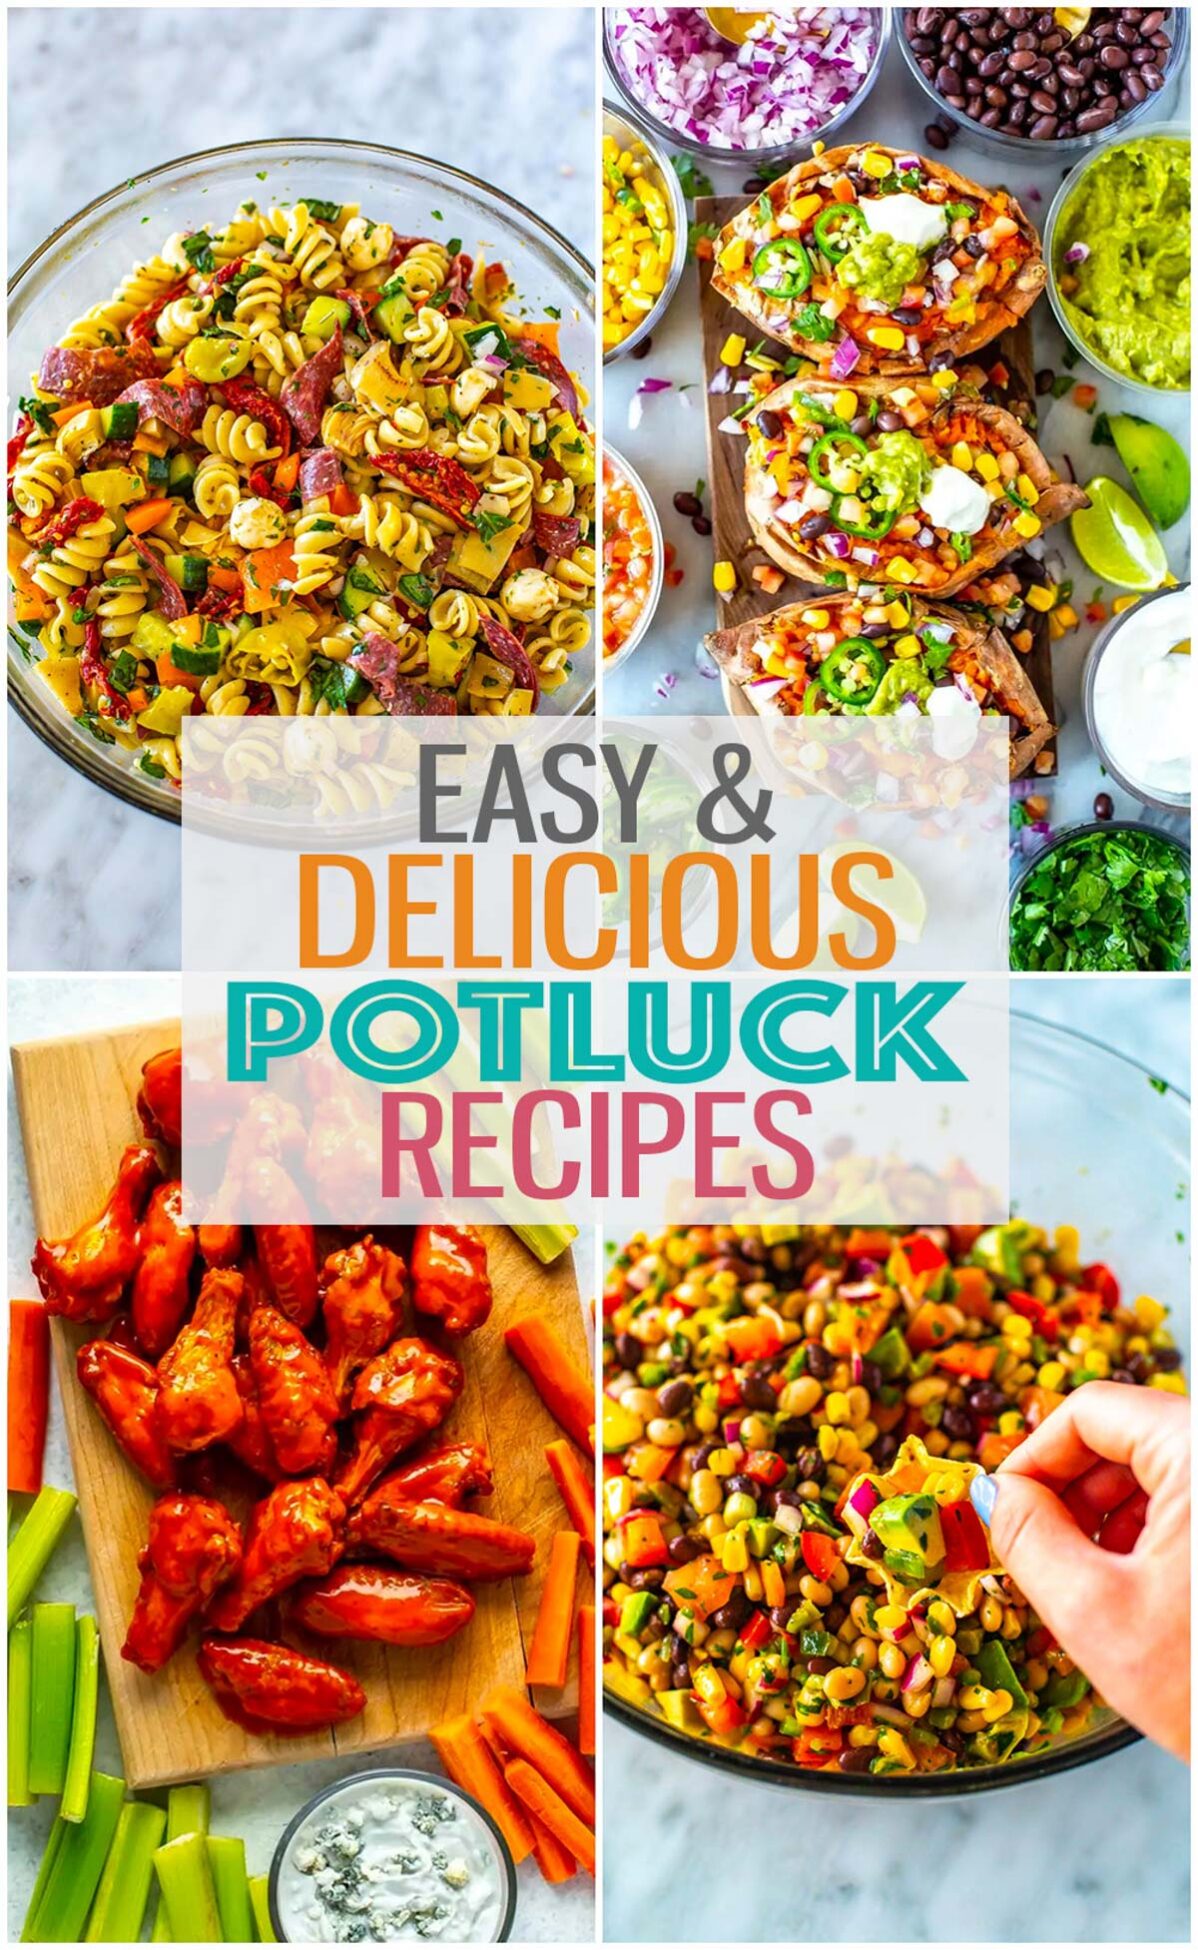 A collage of four different potluck dishes with the text "Easy & Delicious Potluck Recipes" layered over top.